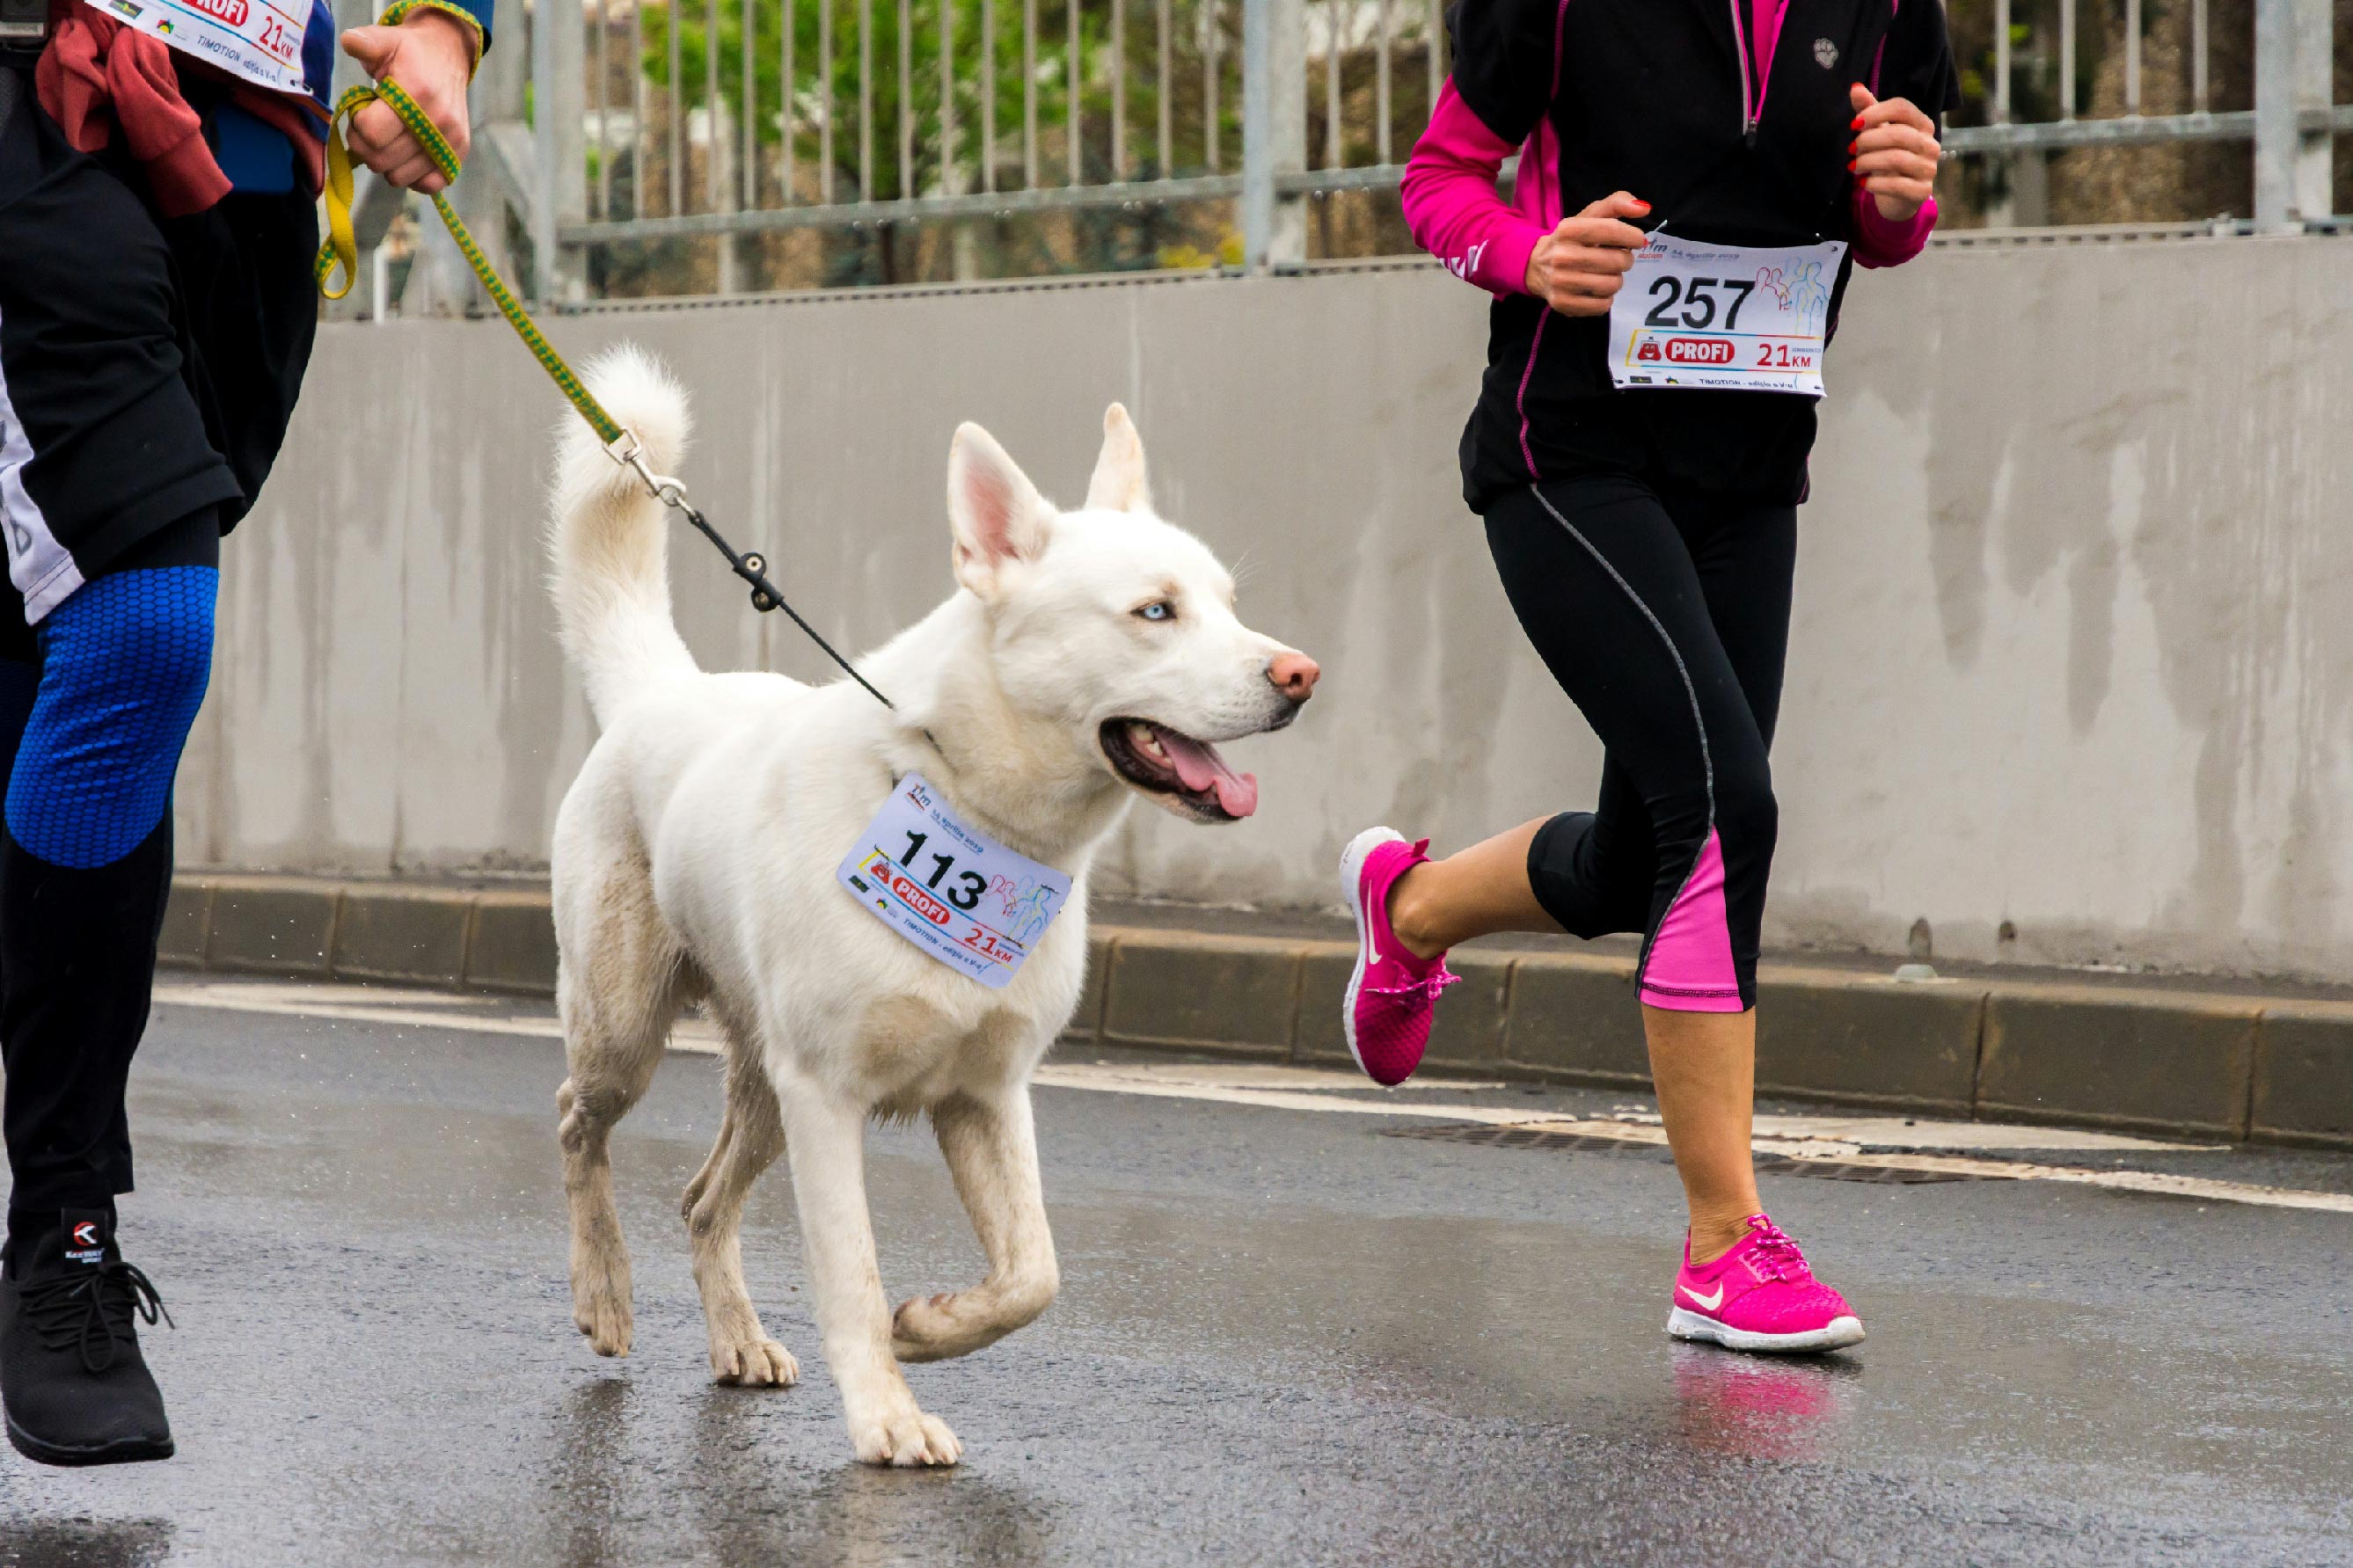 image of dog running a race on a leash with race bib and two runners